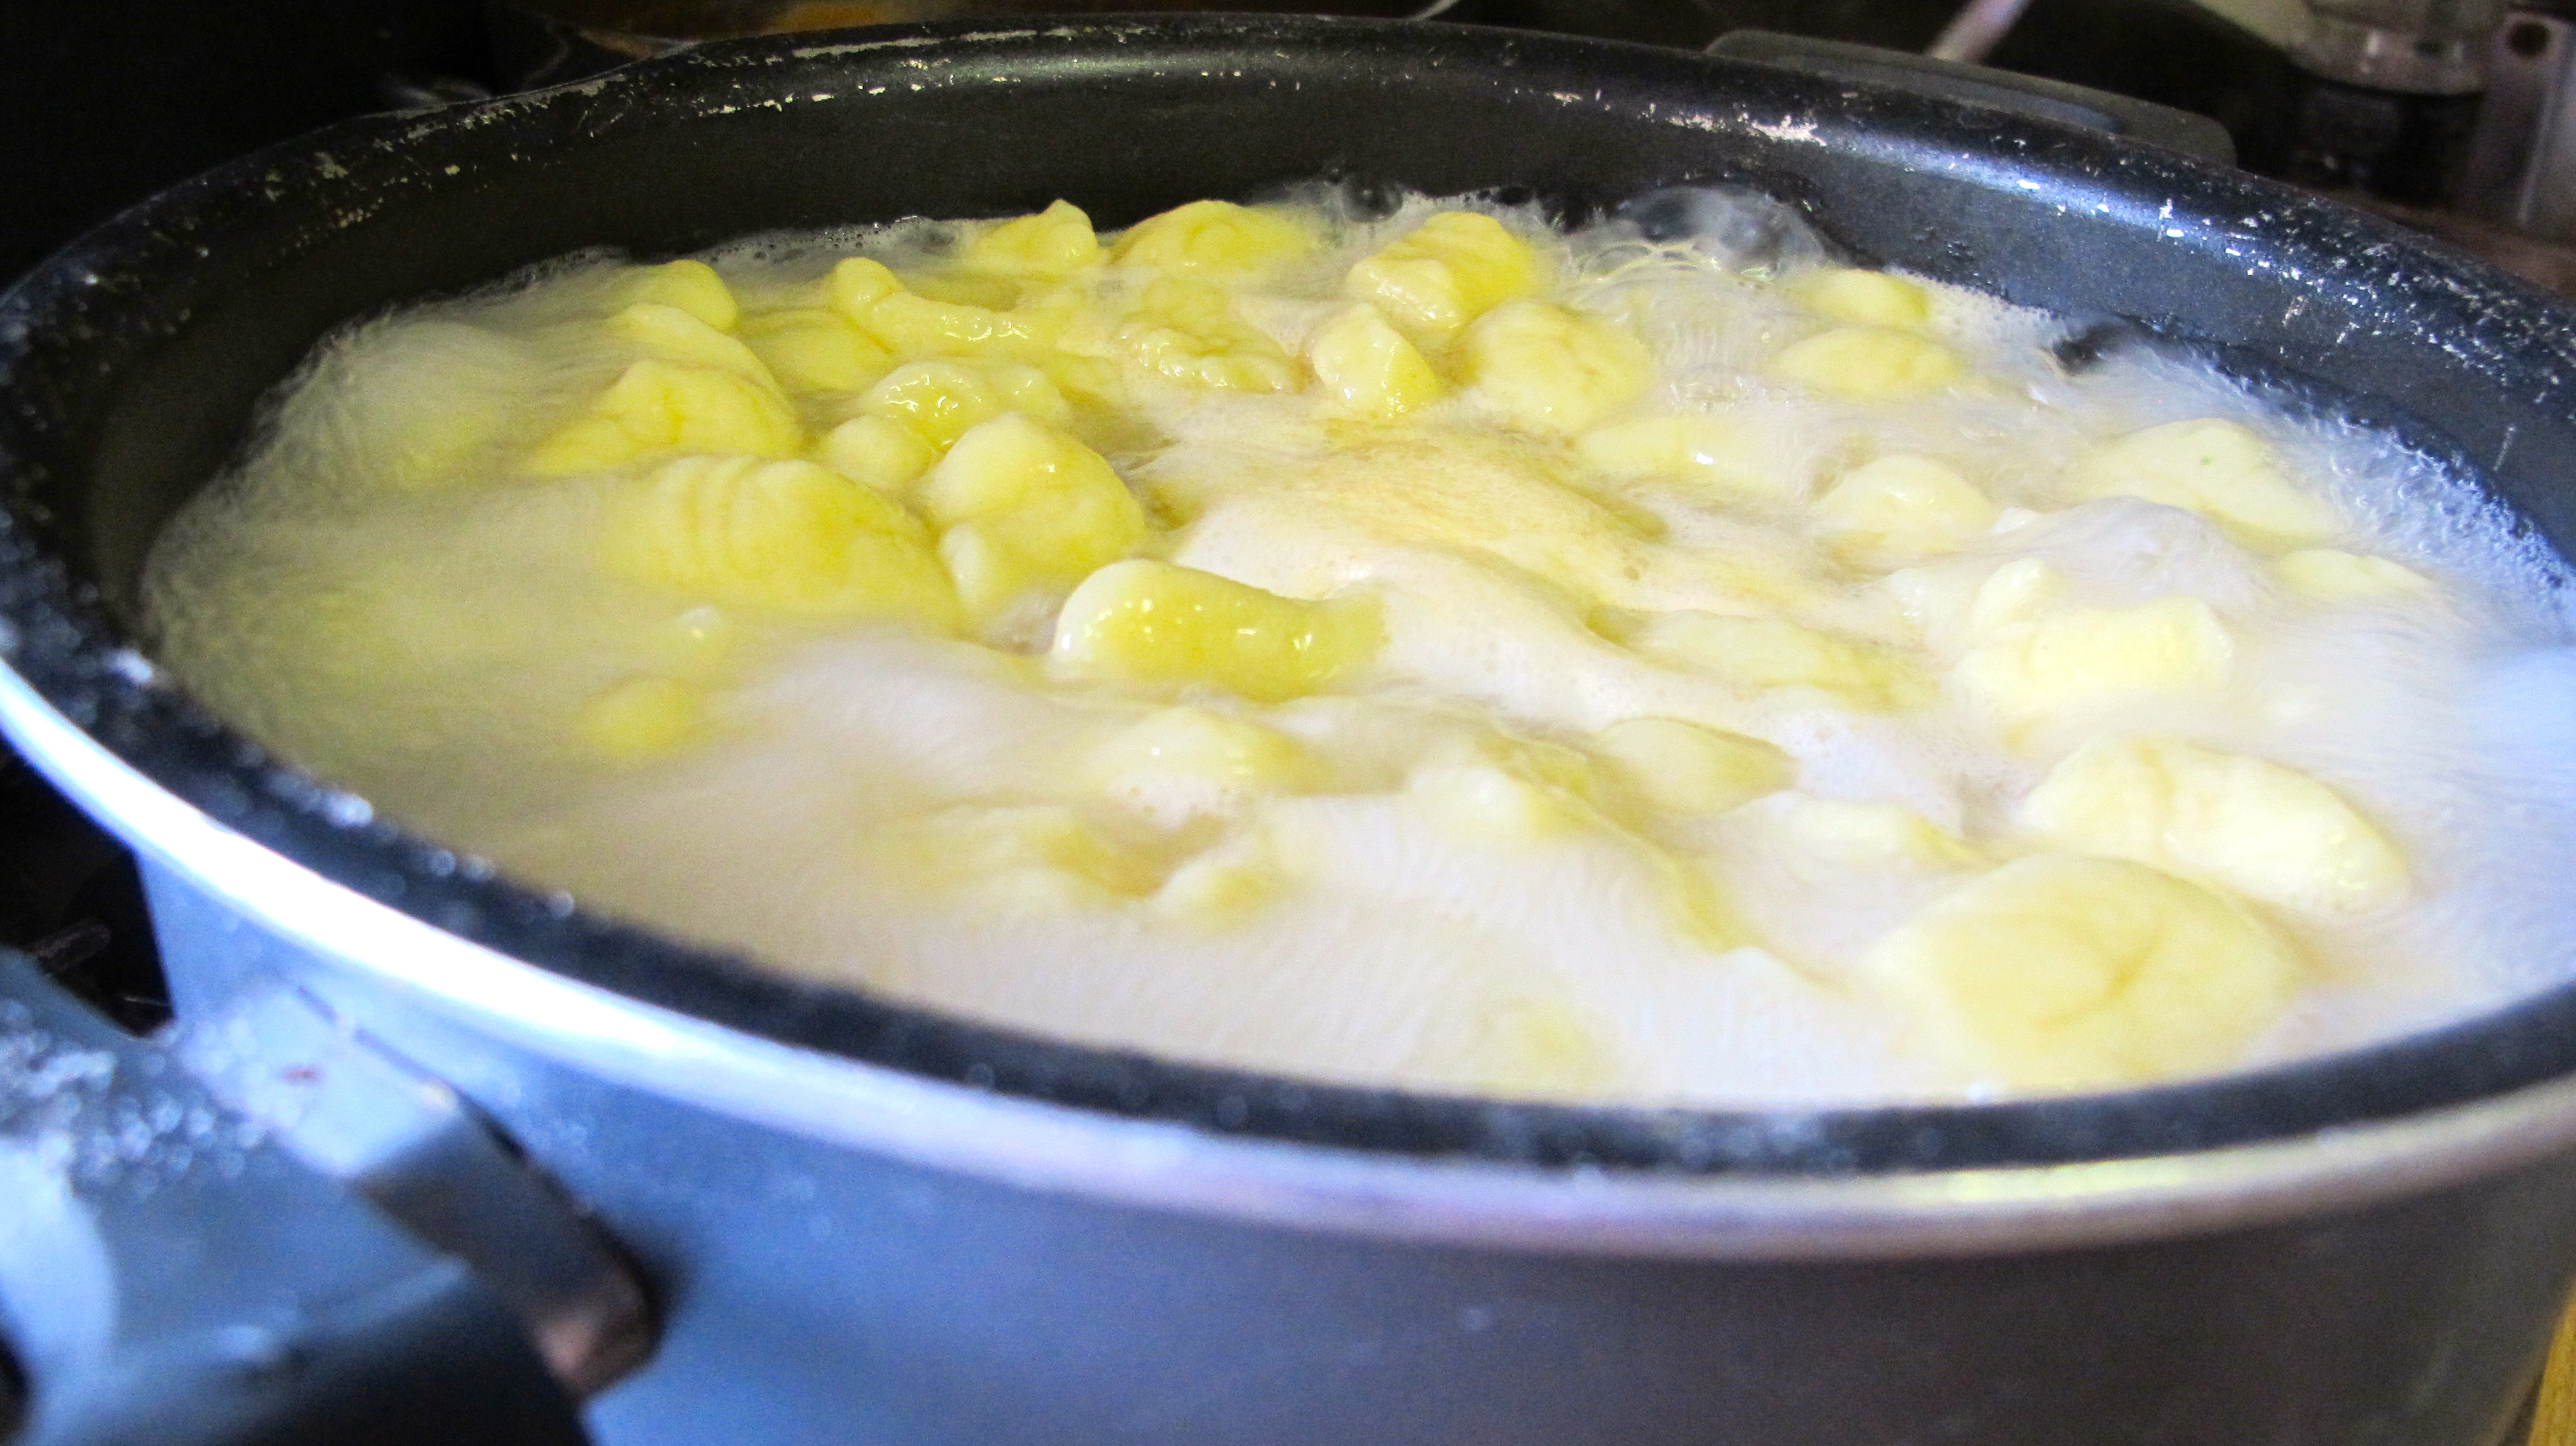 The gnocchi are done when they rise to the surface. 